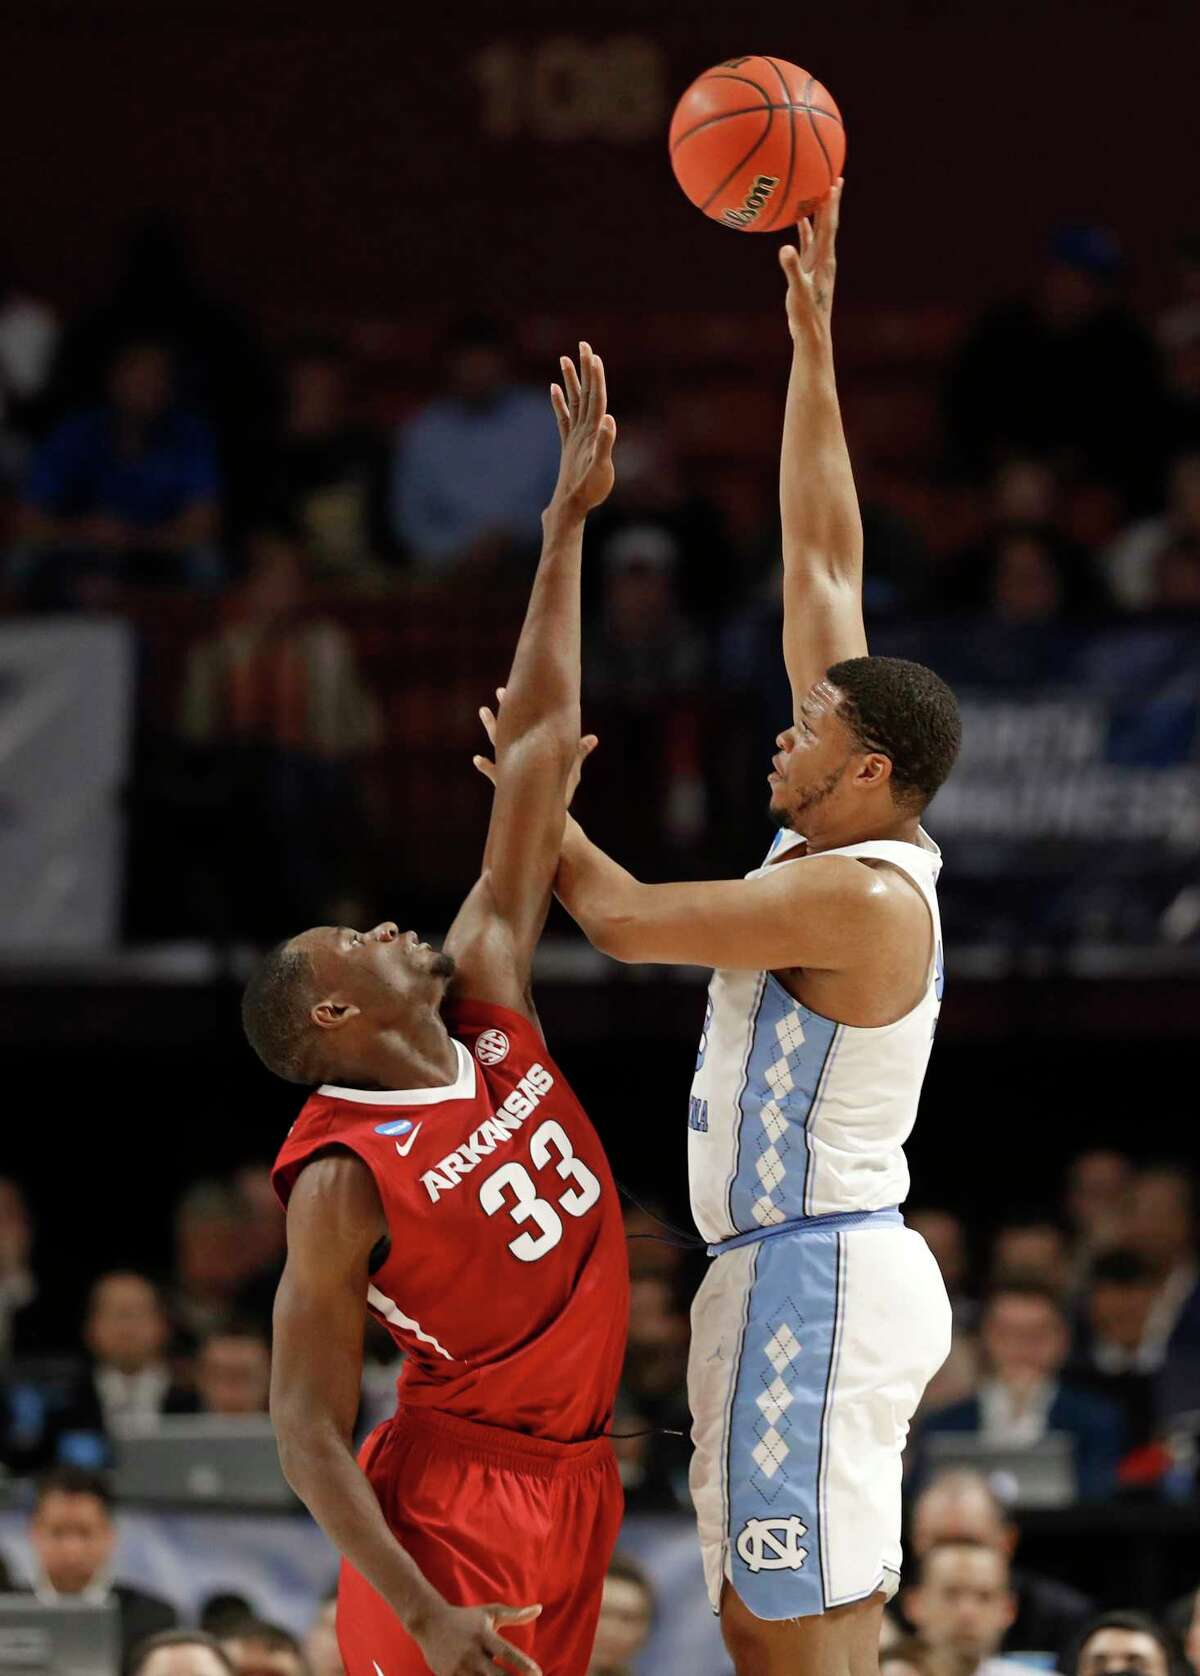 North Carolina's Kennedy Meeks, right, shoots over Arkansas' Moses Kingsley, left, during the first half in a second-round game of the NCAA men's college basketball tournament in Greenville, S.C., Sunday, March 19, 2017. (AP Photo/Chuck Burton) ORG XMIT: SCCB118